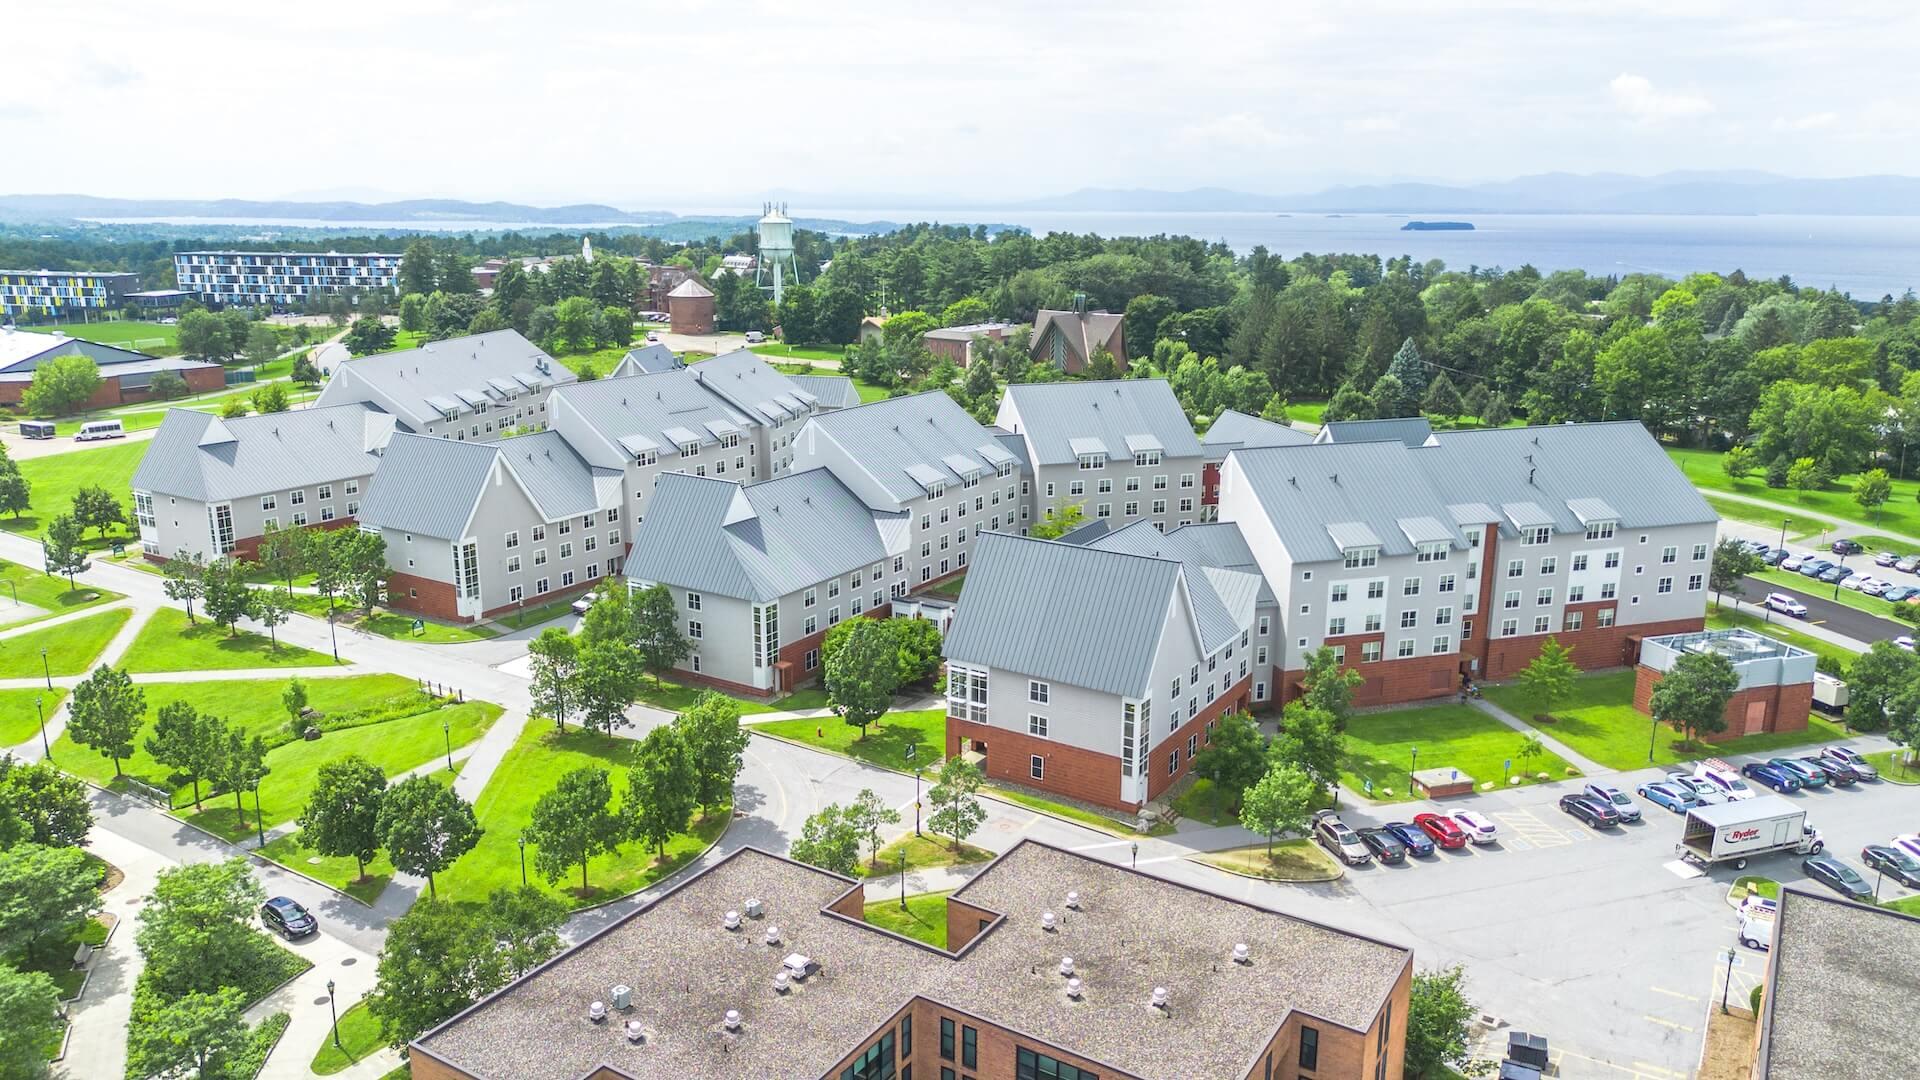 Aerial view of two building complexes featuring house-style residence halls.